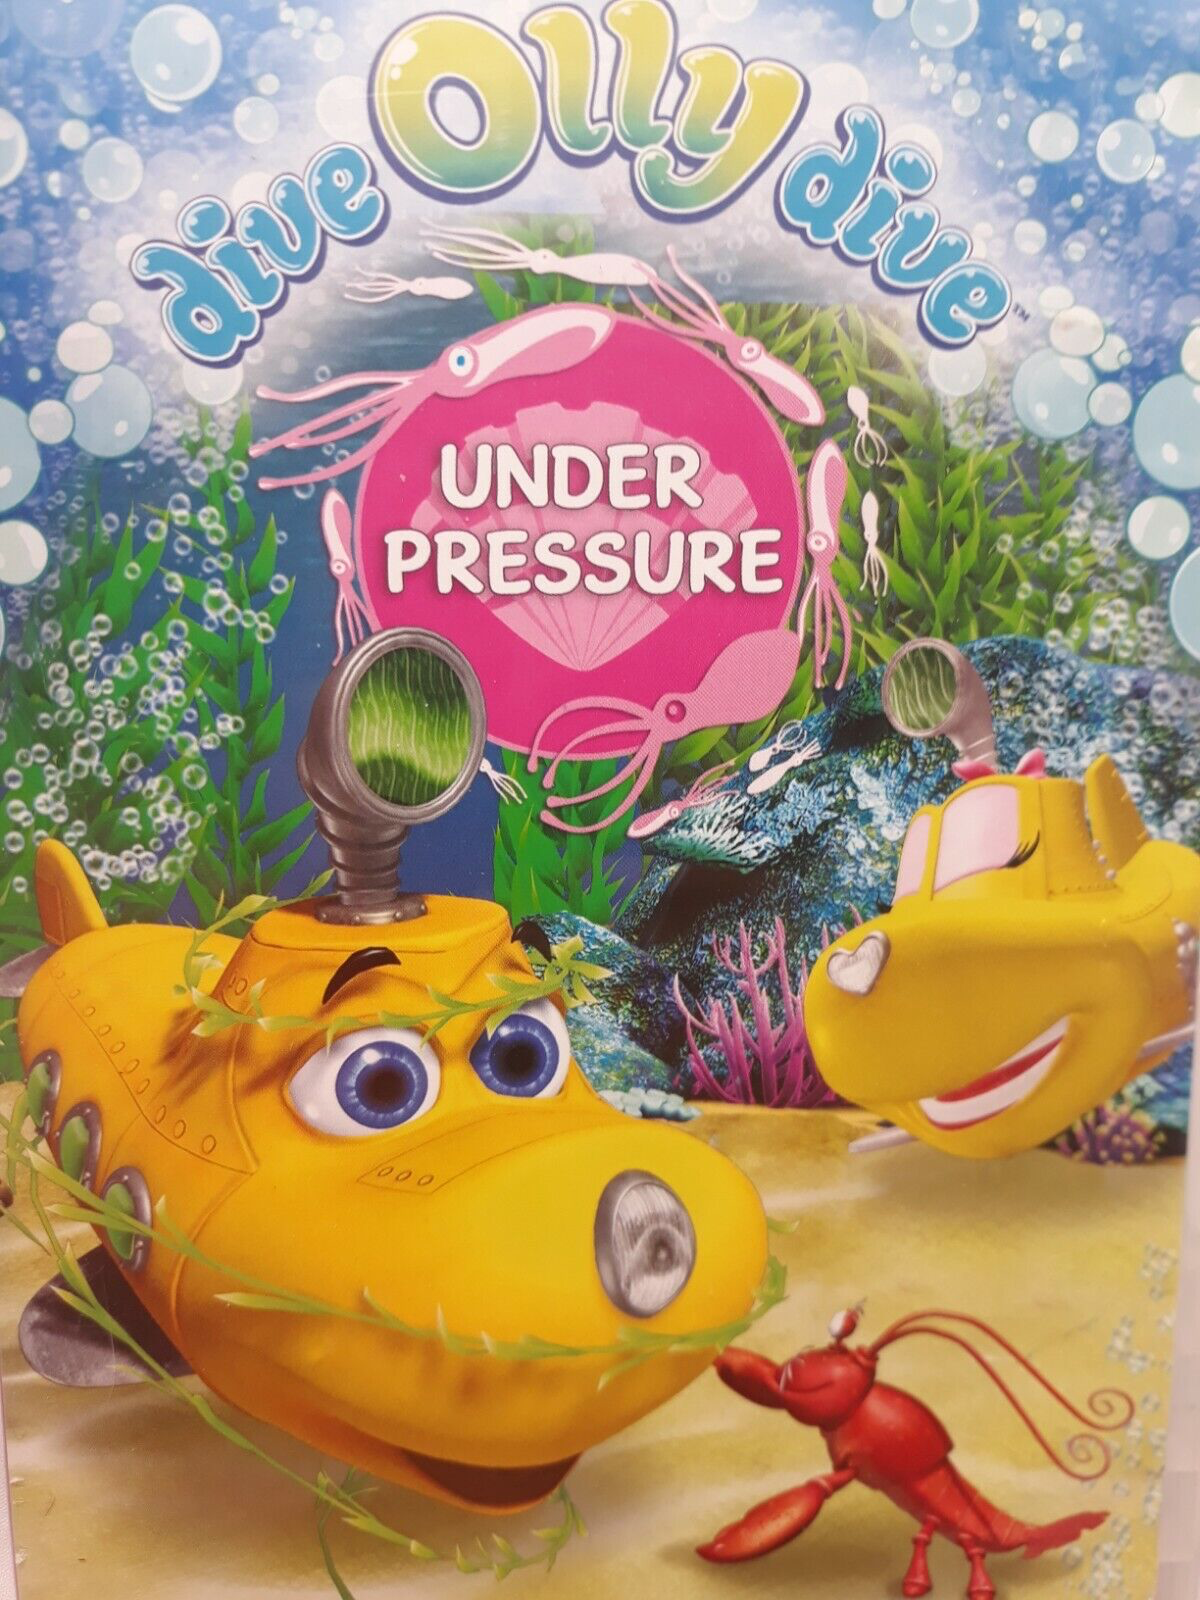 Dive Olly Dive!: Under Pressure - DVD